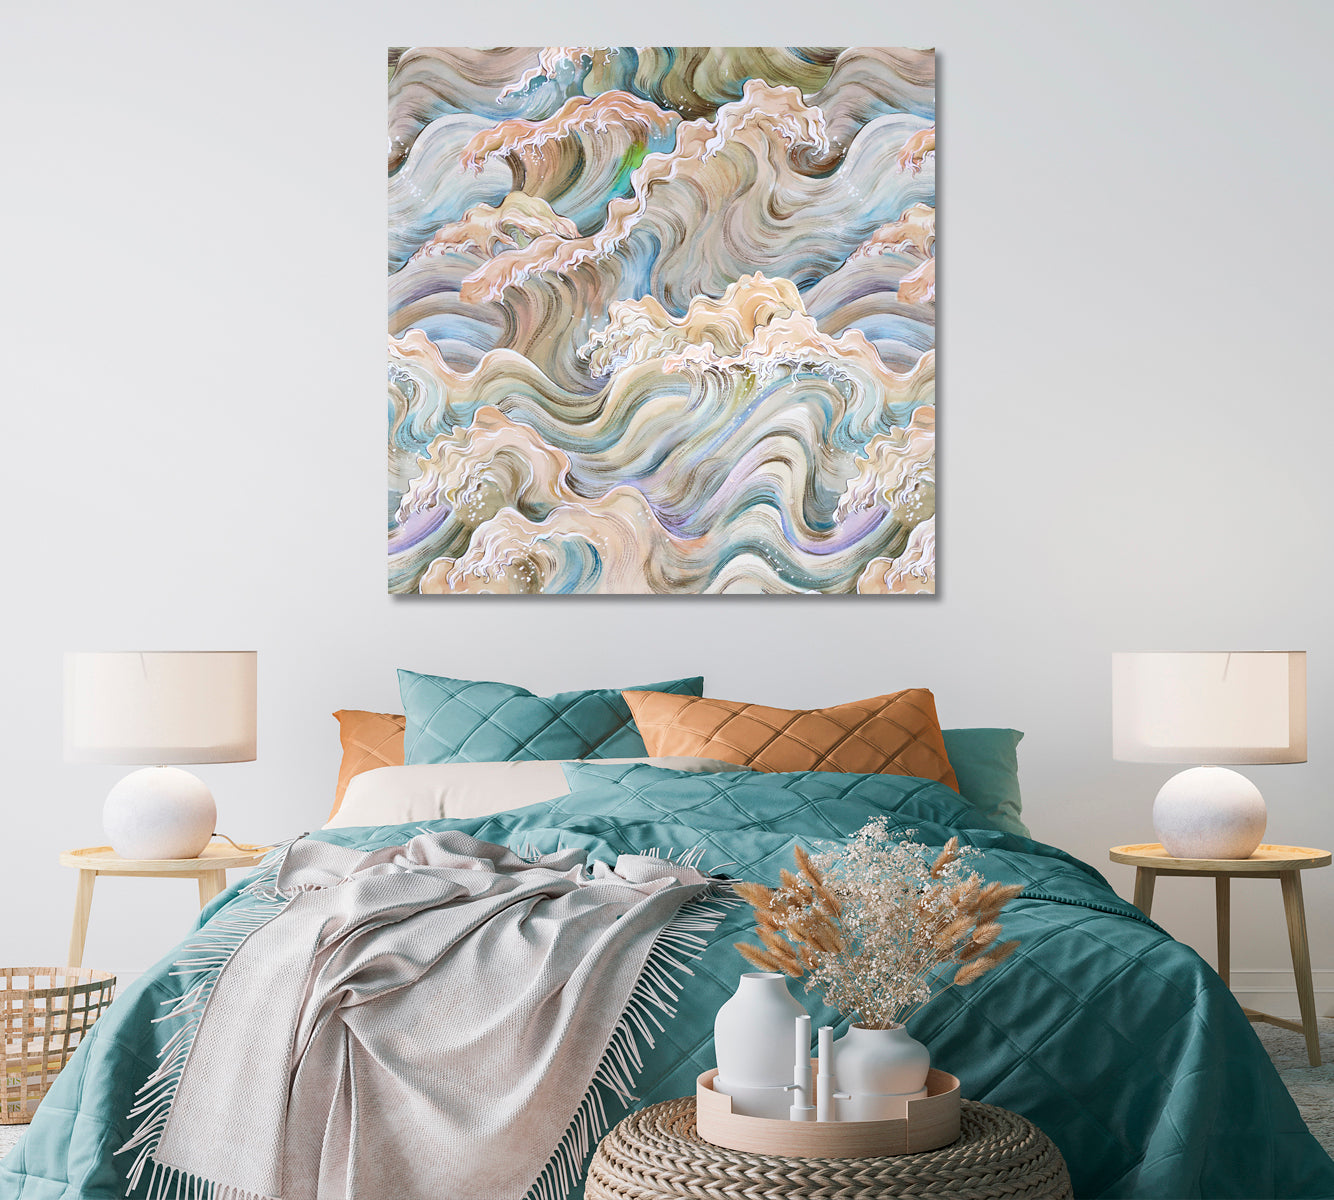 Abstract Creative Sea Waves Canvas Print ArtLexy 1 Panel 12"x12" inches 